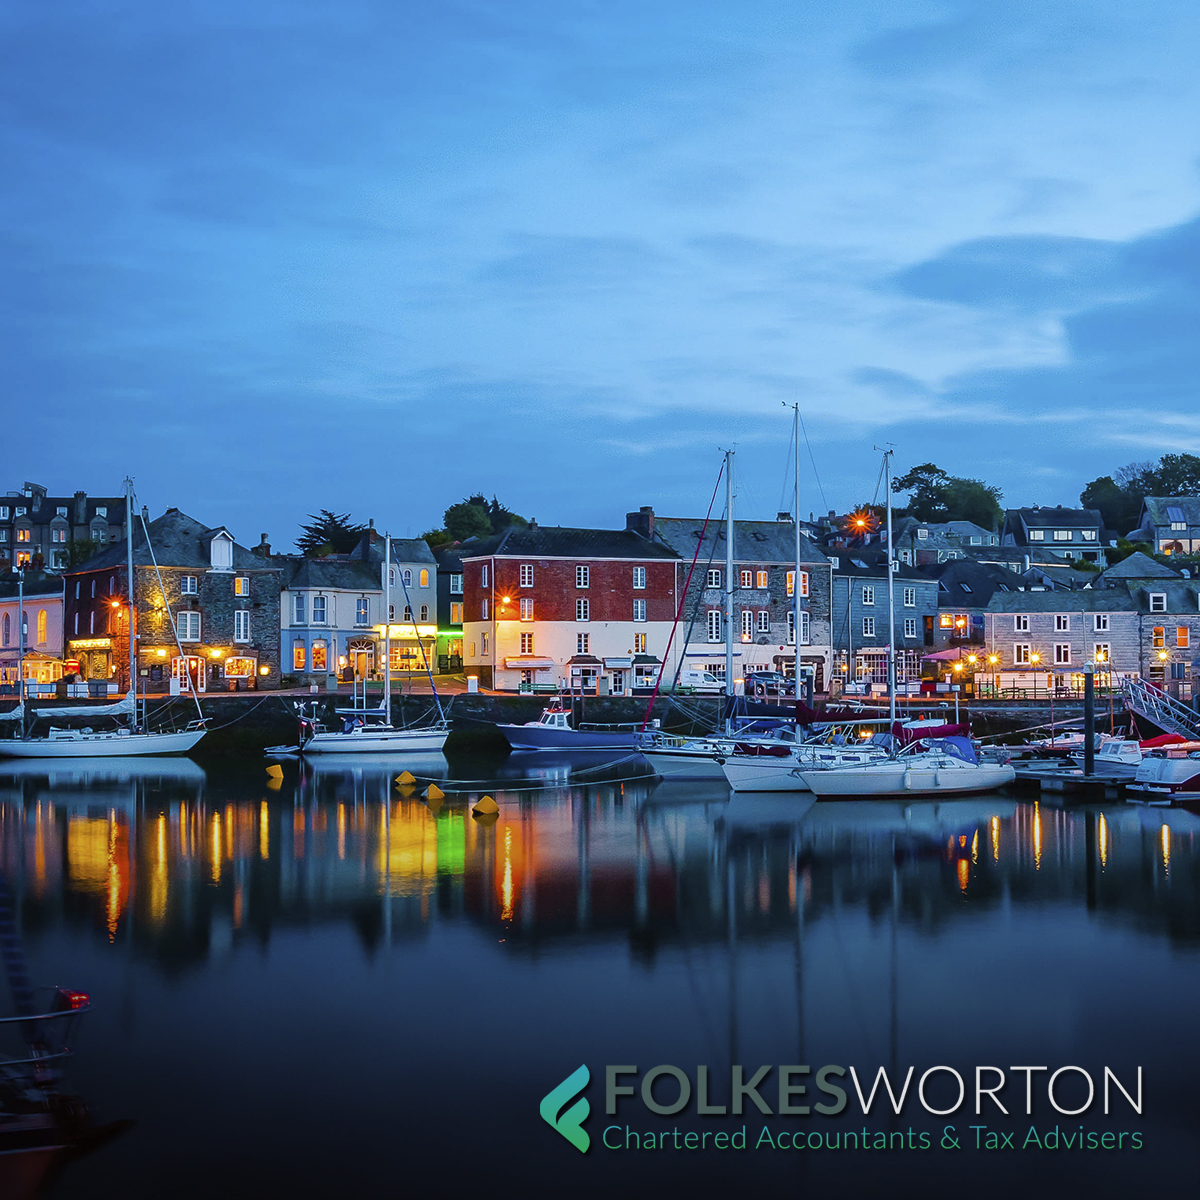 🏠 #HolidayLets Being Assessed for #BusinessRates 🏠
Some self-catering holiday let owners are being asked to provide trade information by the Valuation Office Agency.

Folkes Worton LLP Chartered #Accountants #AccountingForTheFuture #holidayhomes #VOA
fwca.co.uk/holiday-lets-b…